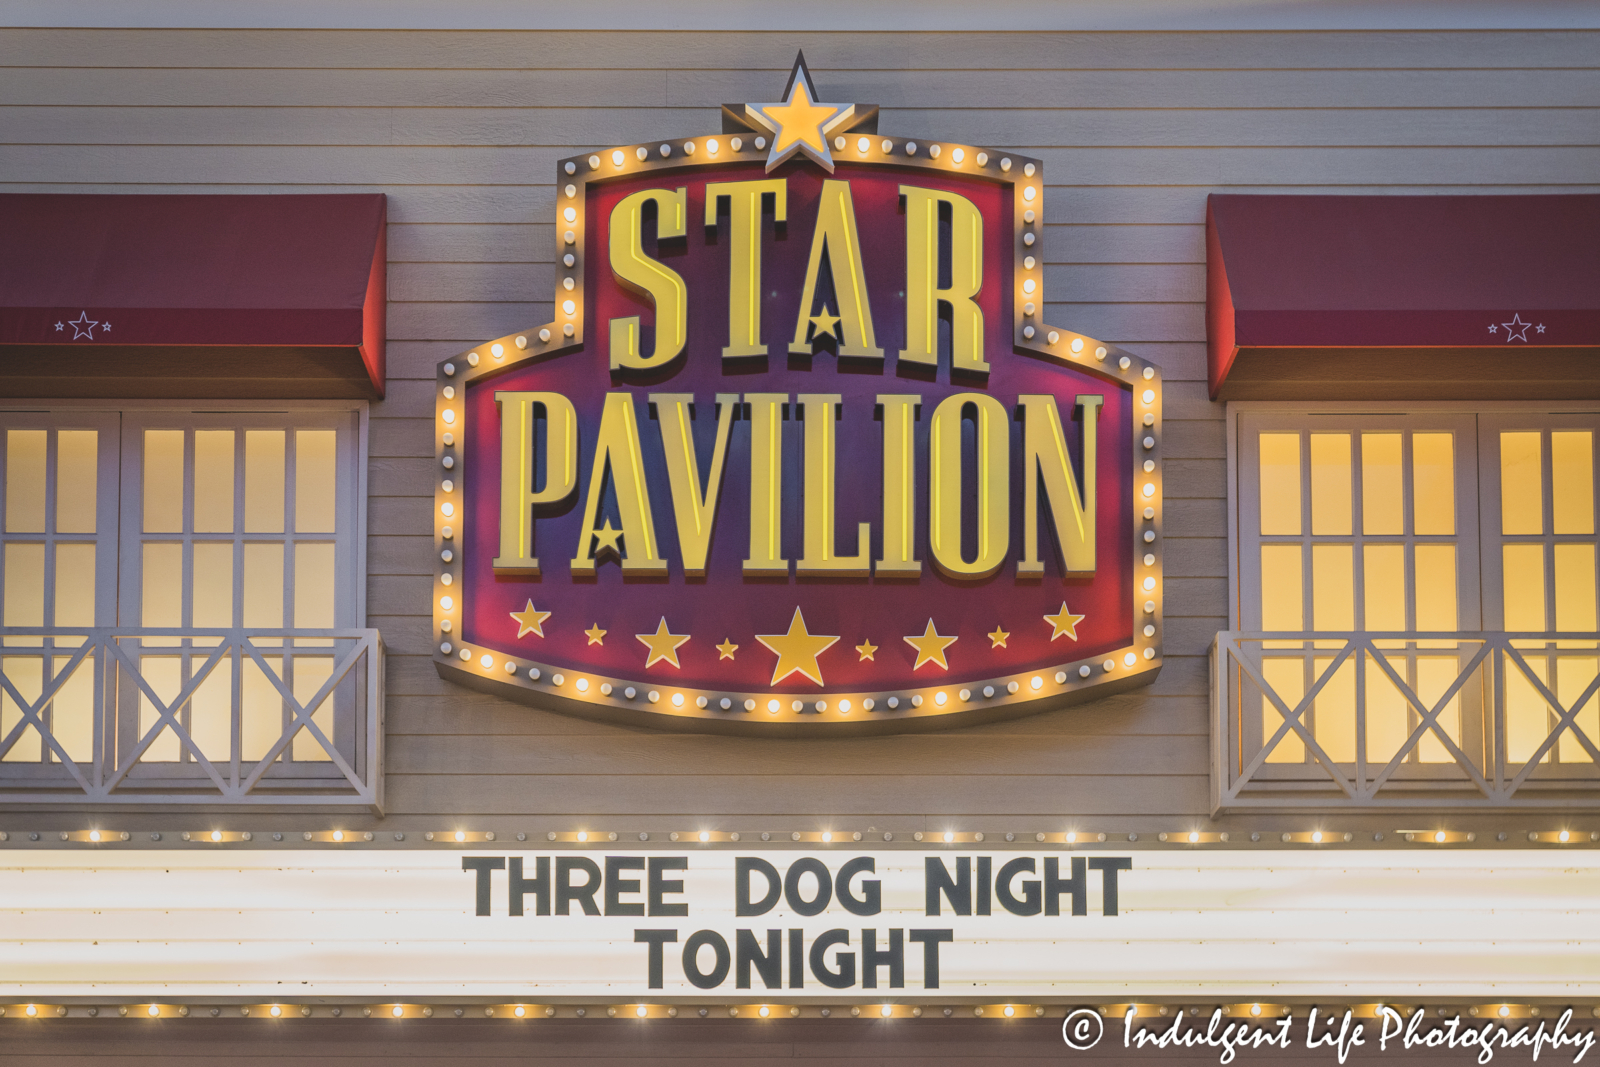 Star Pavilion marquee at Ameristar Casino in Kansas City, MO featuring Three Dog Night on September 29, 2023.